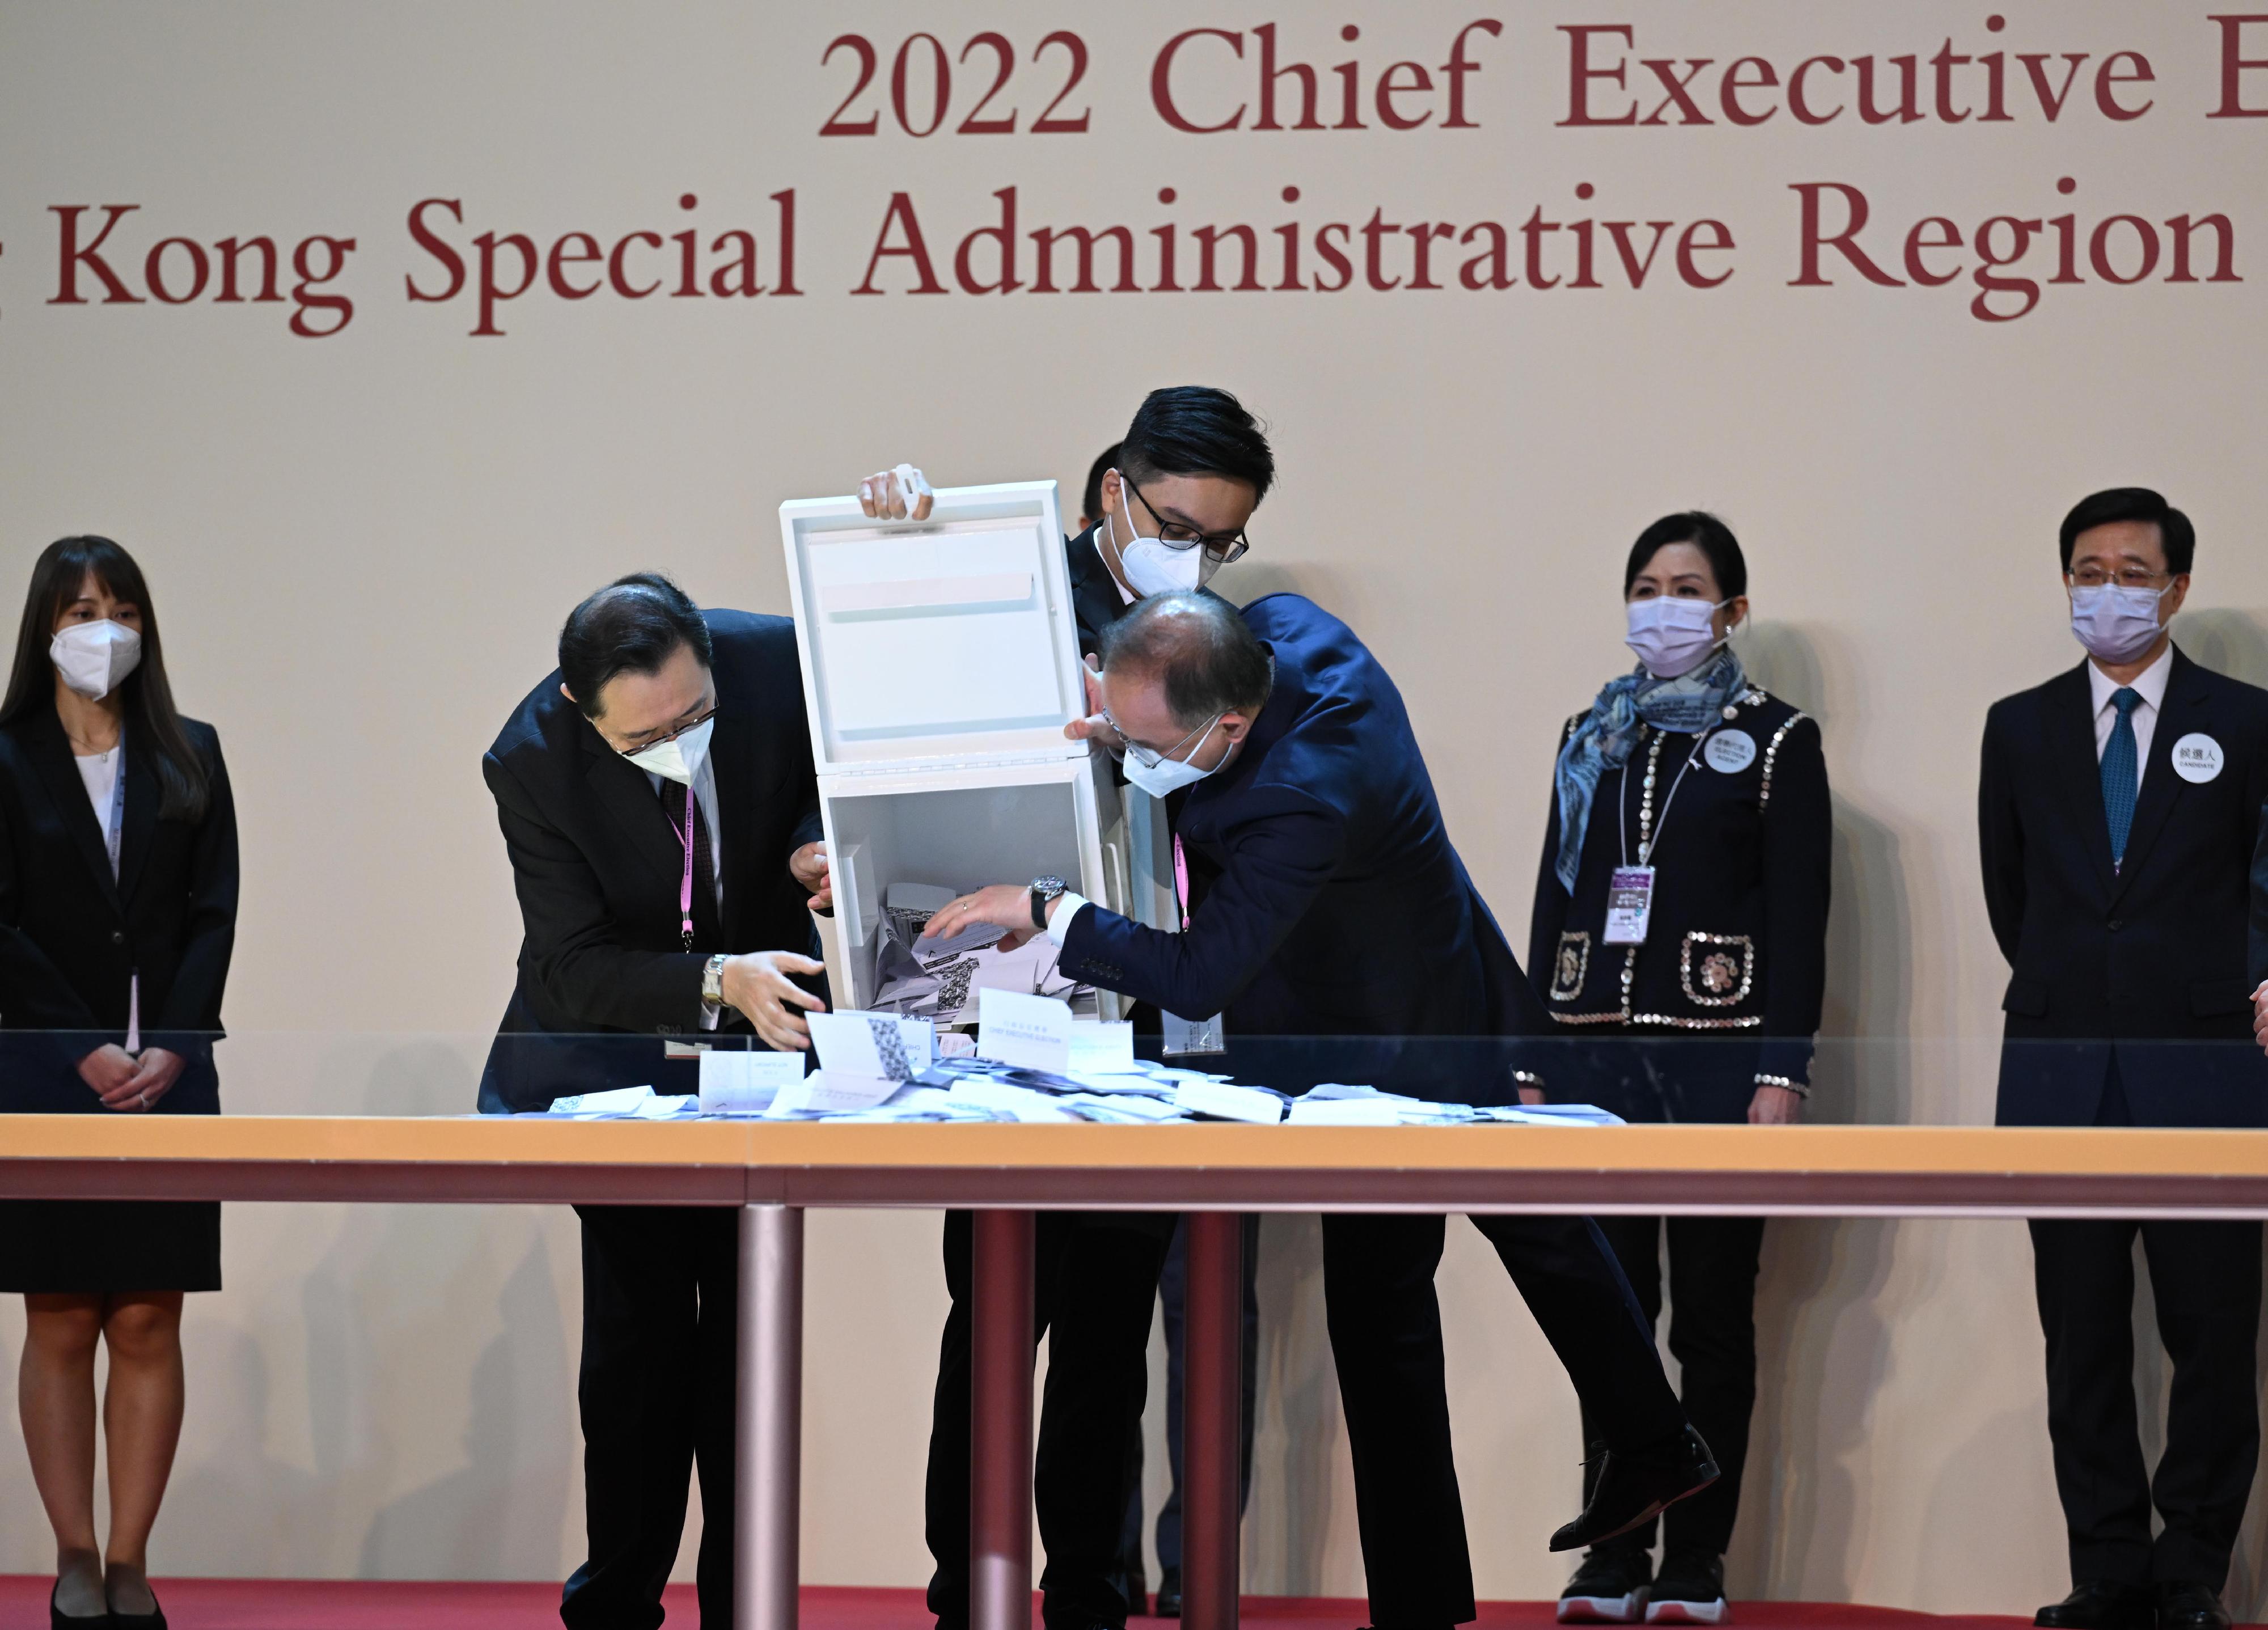 The Chairman of the Electoral Affairs Commission, Mr Justice Barnabas Fung Wah (front row, left), and the Secretary for Constitutional and Mainland Affairs, Mr Erick Tsang Kwok-wai (front row, right), empty a ballot box at the central counting station cum media centre of the 2022 Chief Executive Election at the Hong Kong Convention and Exhibition Centre in Wan Chai  today (May 8).